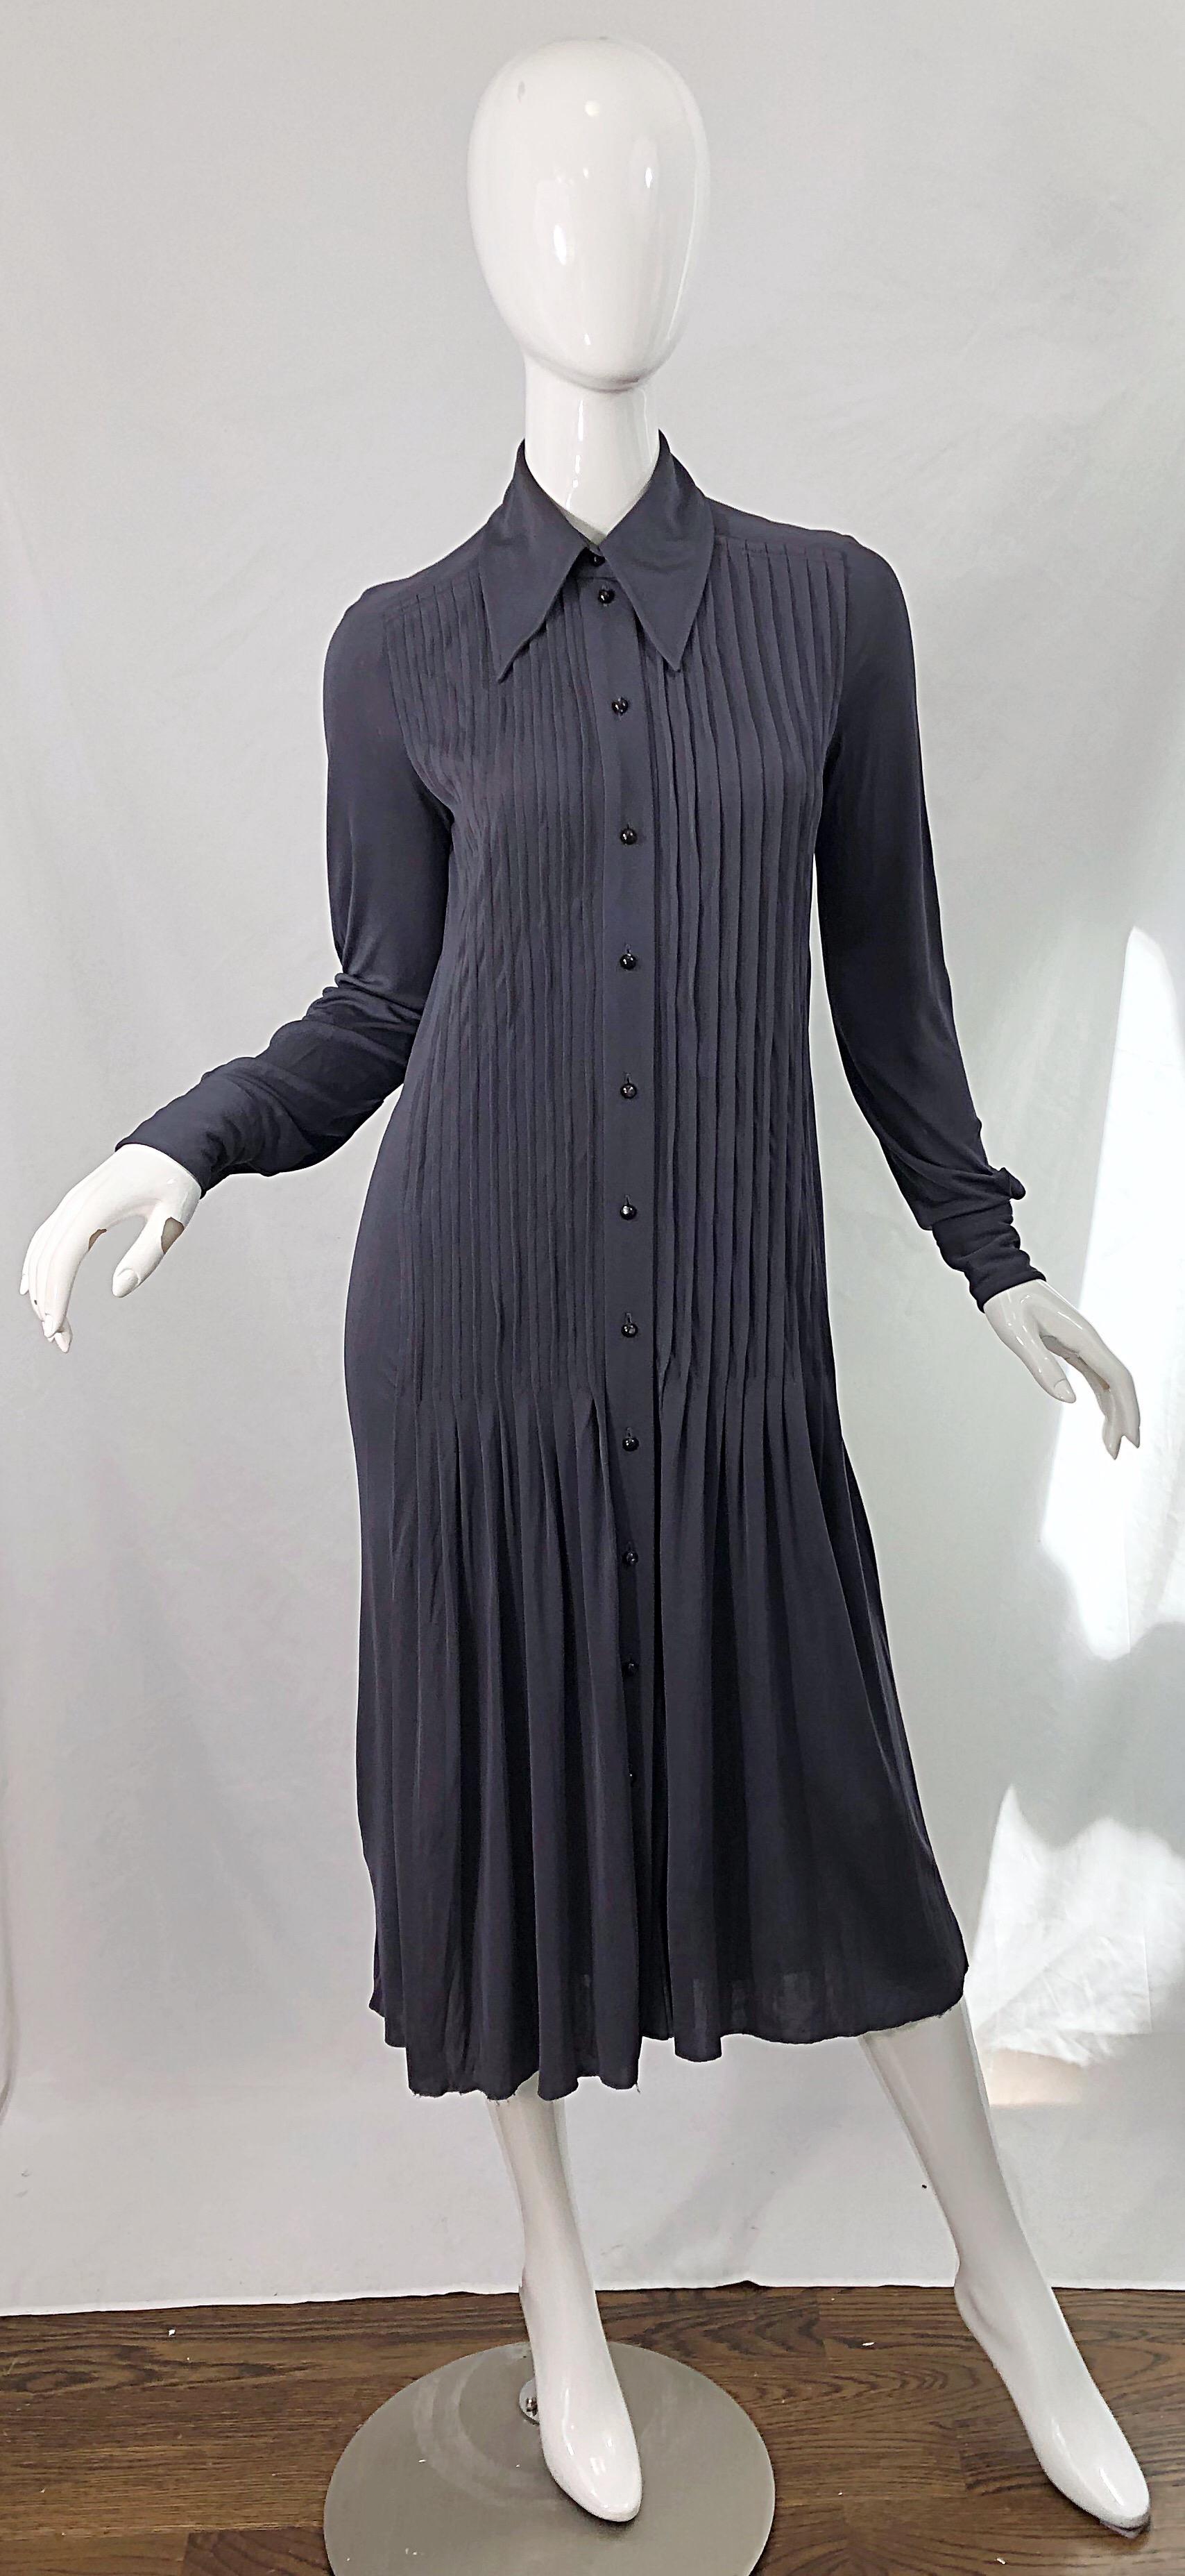 MARC JACOBS for BERGDORF GOODMAN early 2000s 1920s flapper style grey shirt dress ! Features a pleated bodice with a drop waist. Buttons up the front and at each sleeve cuff. Can be worn multiple ways, belted or alone. 100% Rayon with lots of